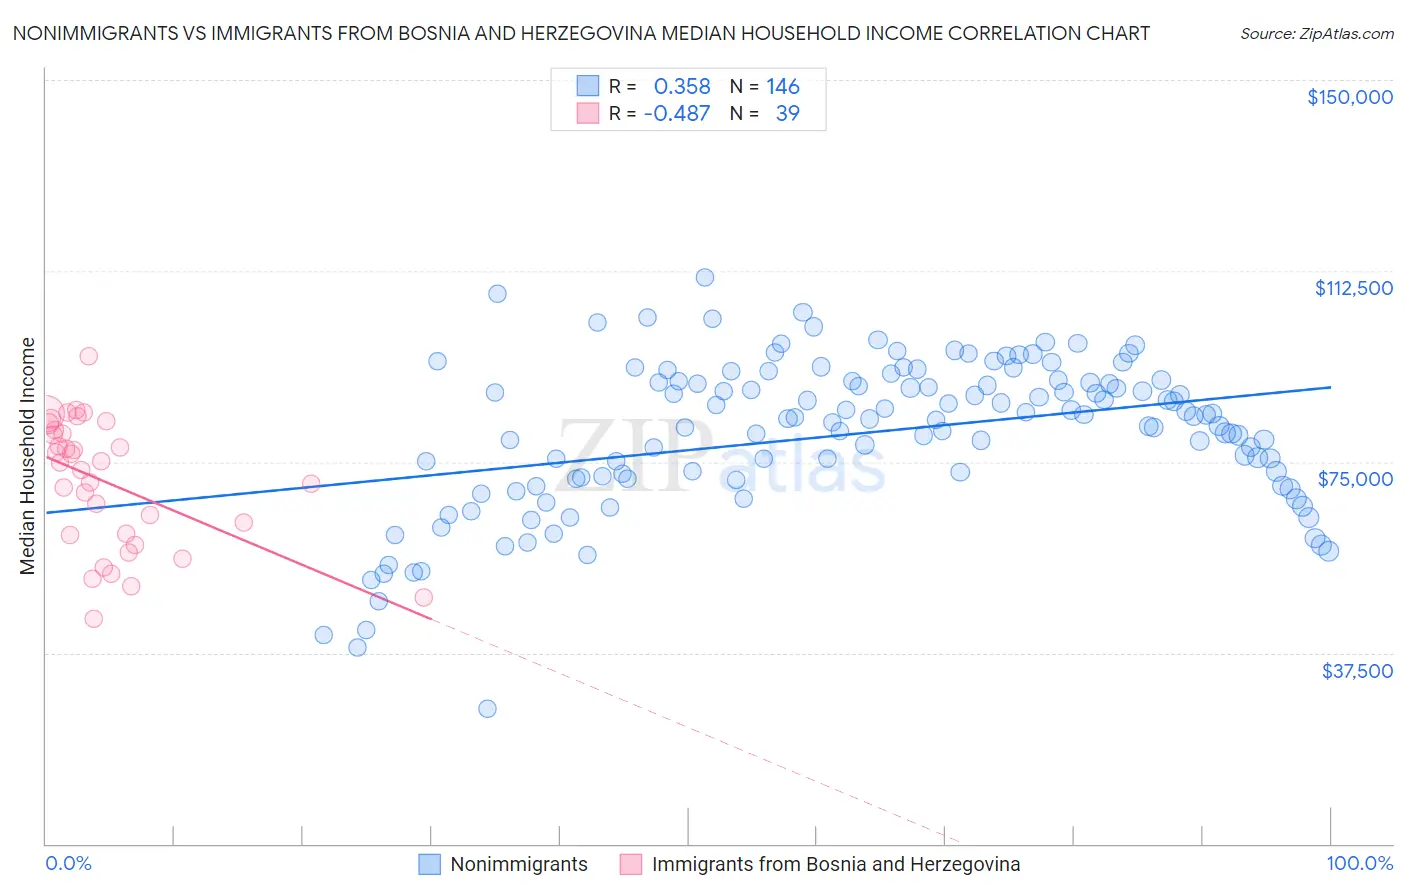 Nonimmigrants vs Immigrants from Bosnia and Herzegovina Median Household Income